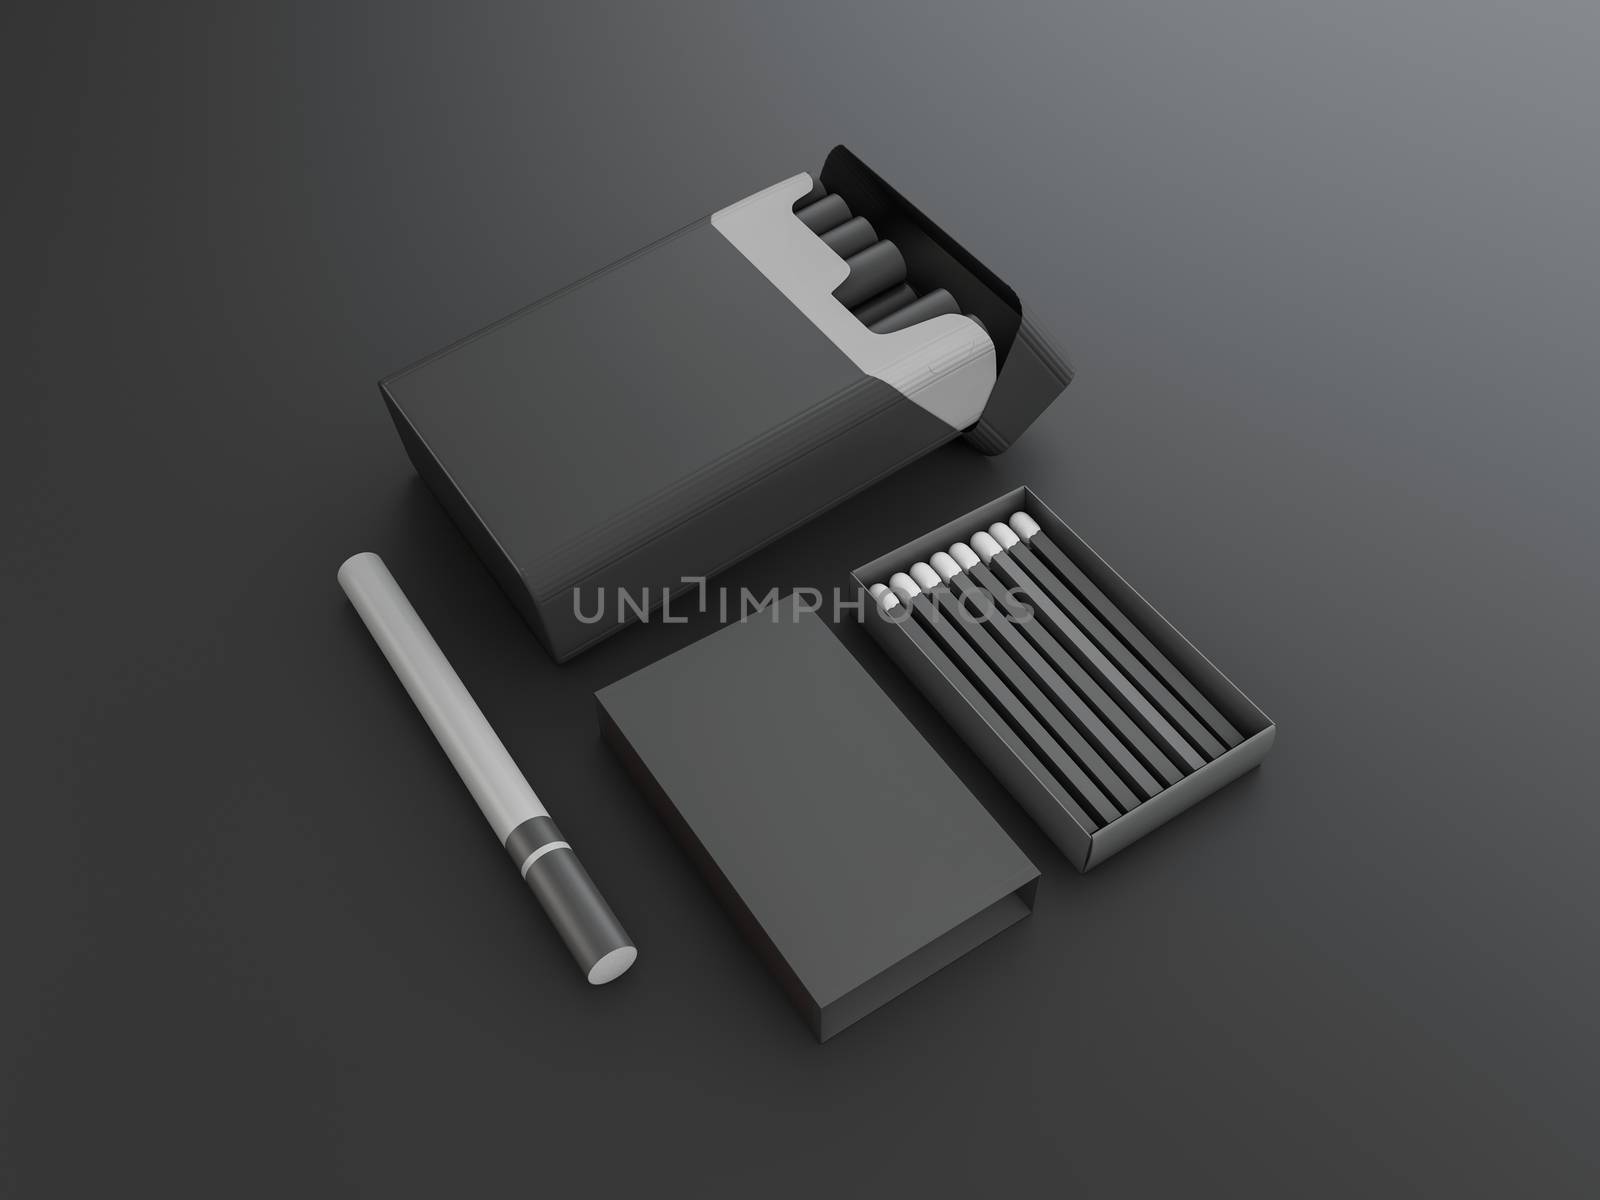 3d Rendering of cigarettes and matches on black background